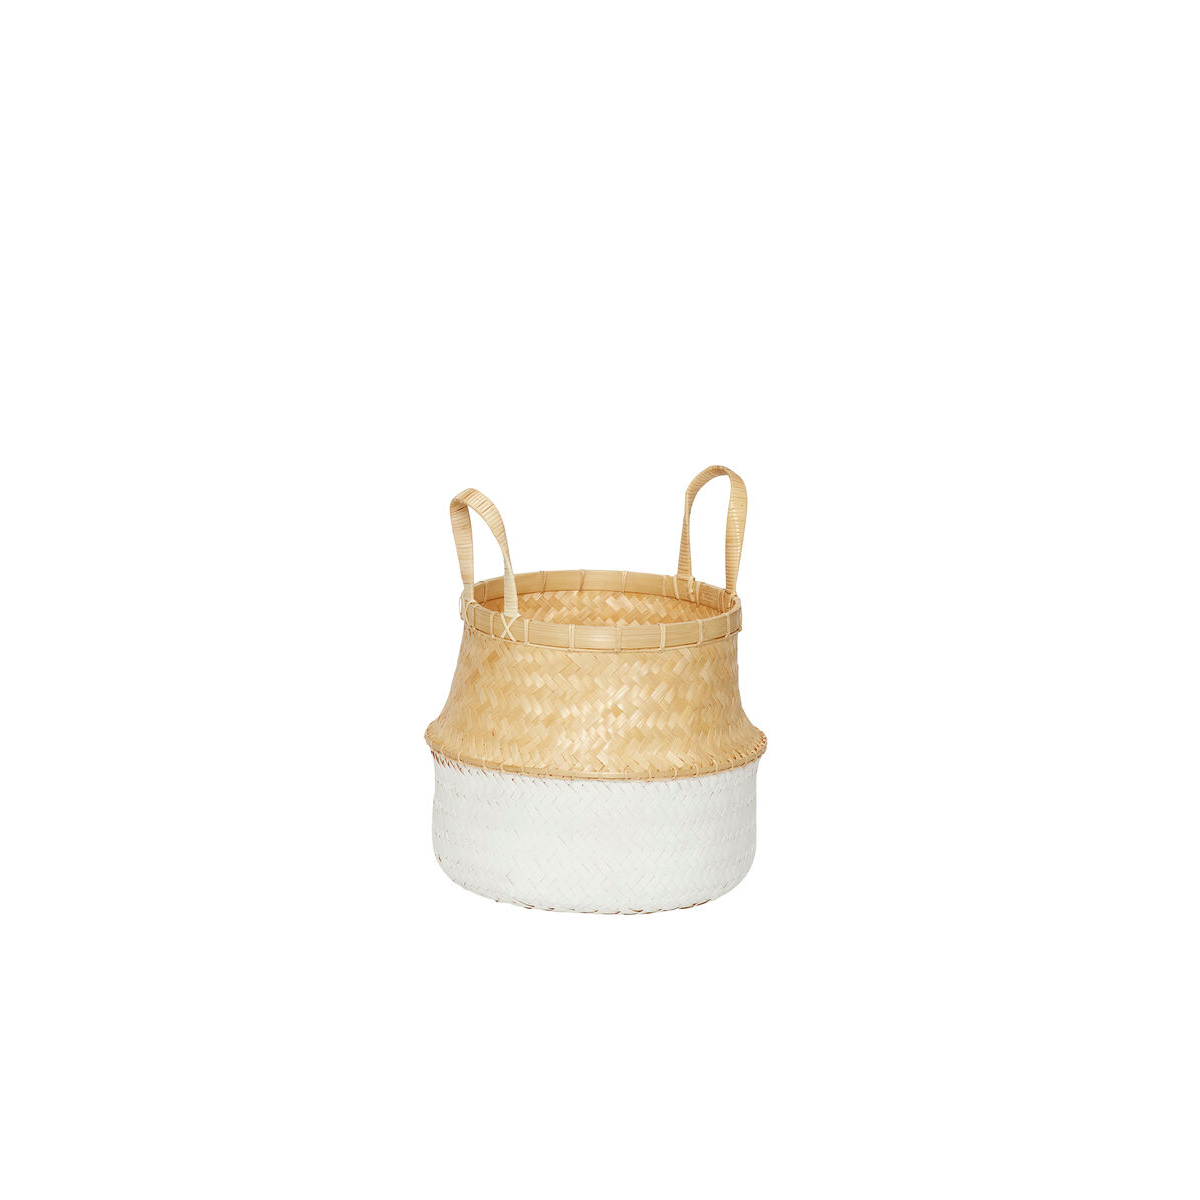 Hubsch White/Natural Rattan Belly Basket in Small